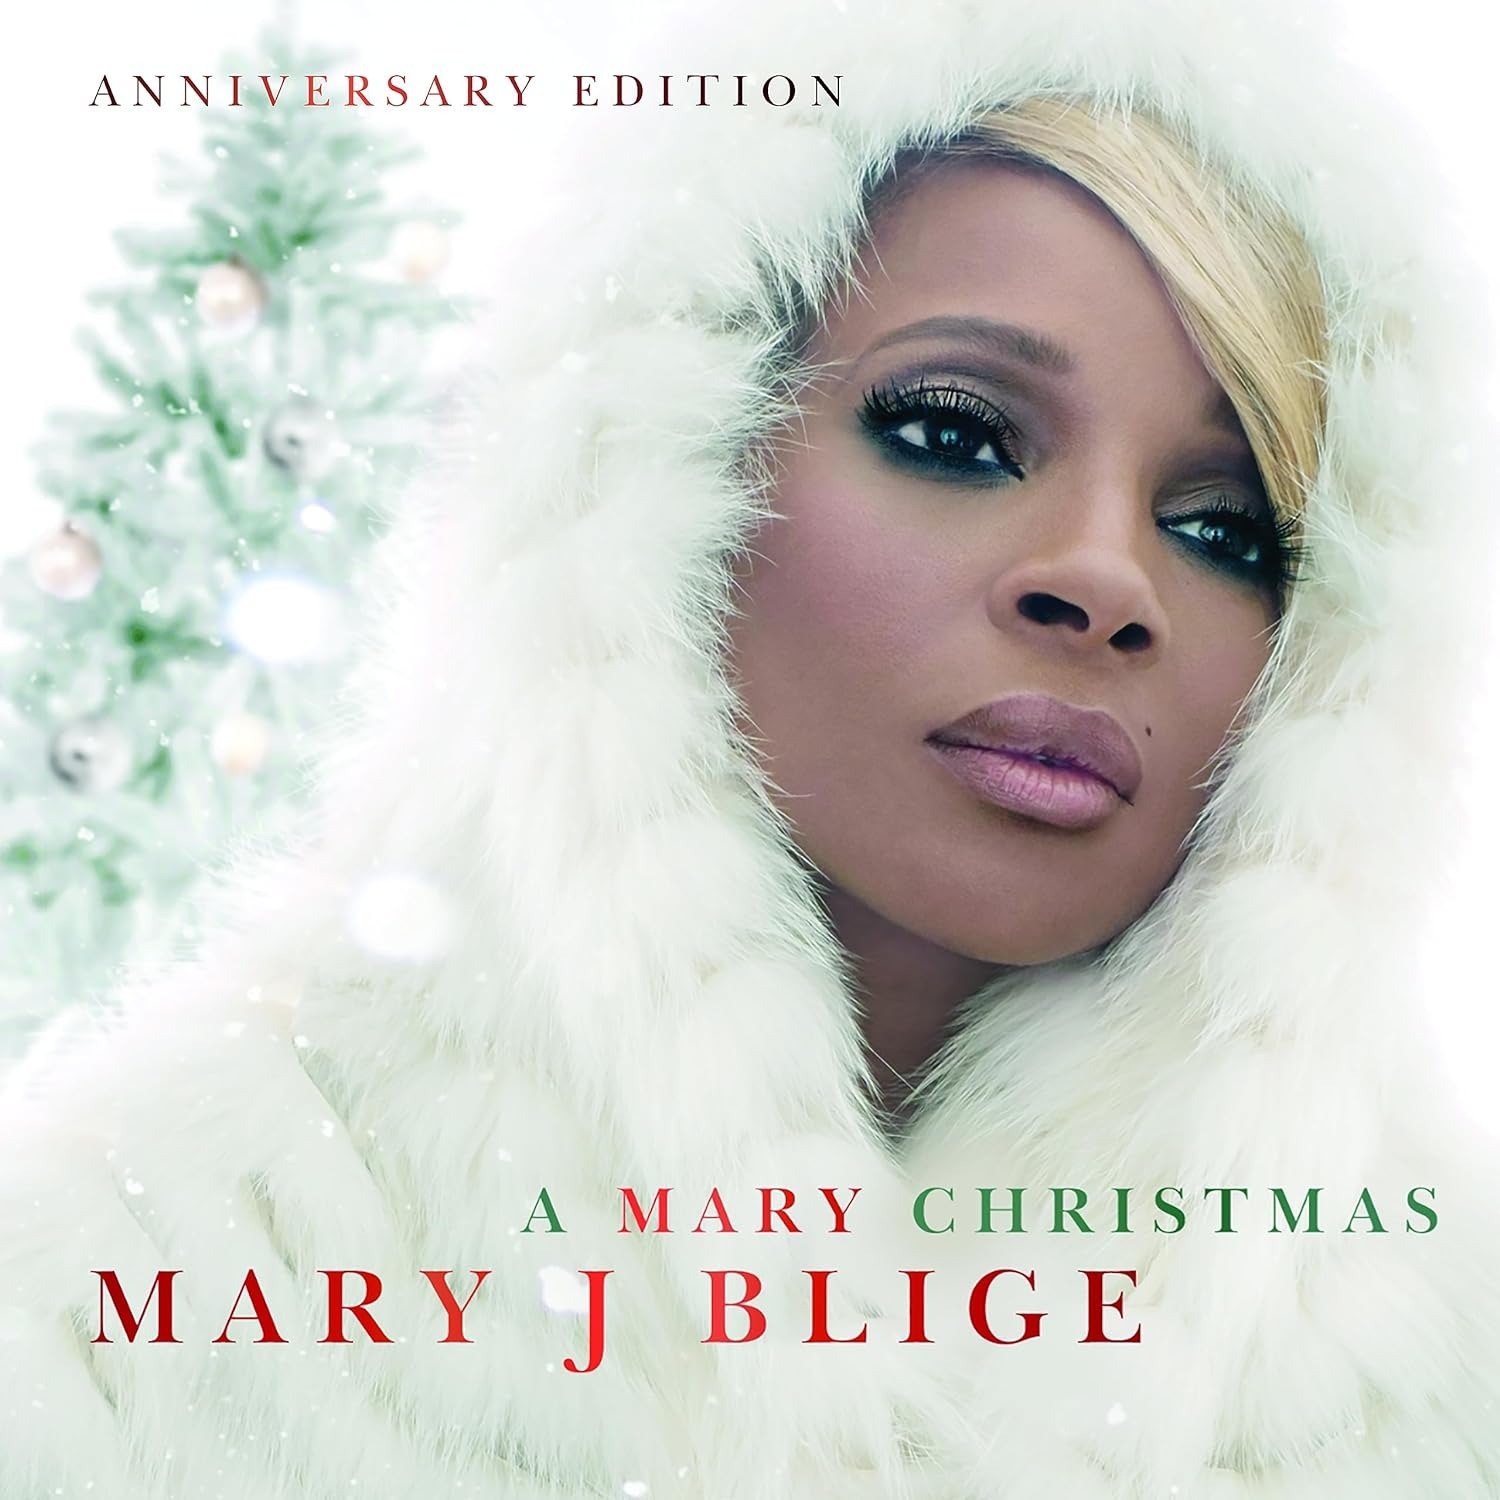 CD Shop - BLIGE MARY J A Mary Christmas (Anniversary Edition)